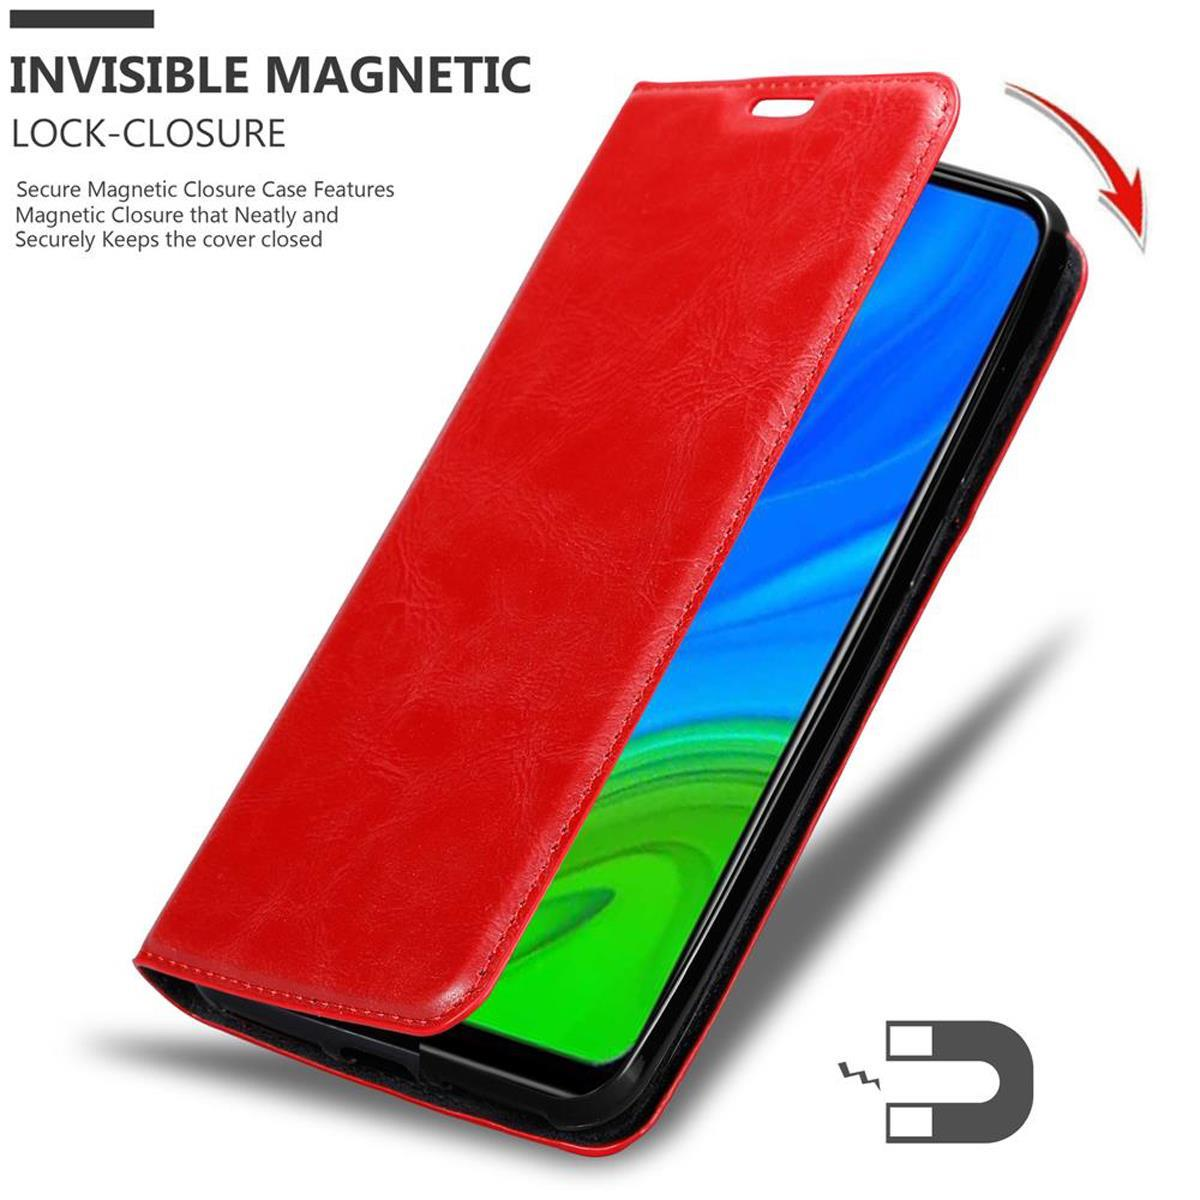 CADORABO Book P Huawei, Bookcover, SMART Invisible Hülle APFEL Magnet, 2020, ROT